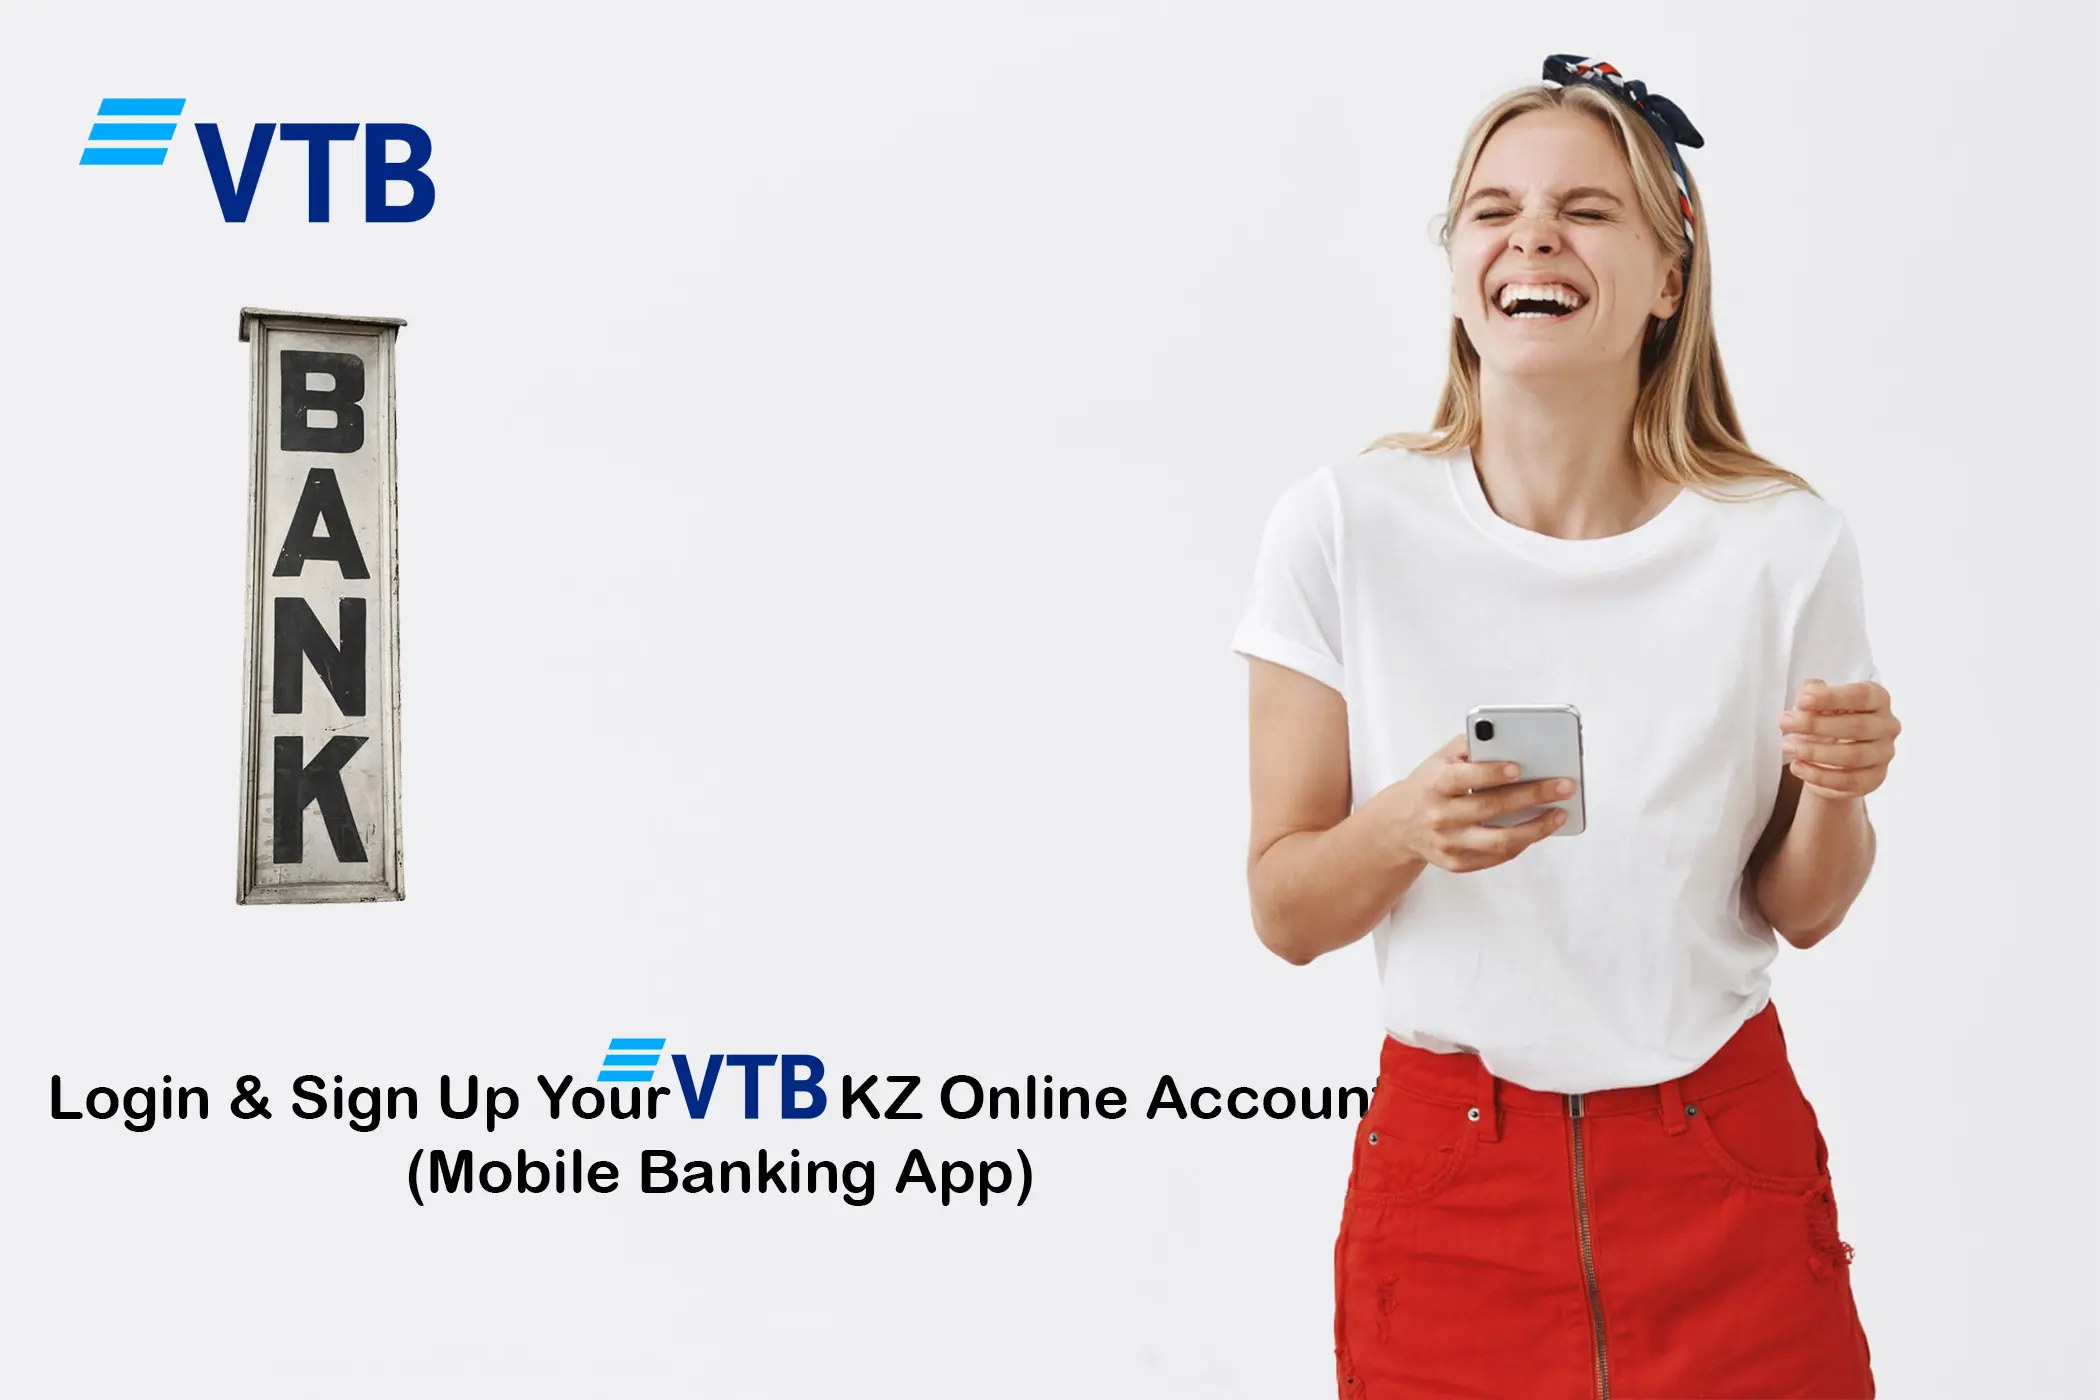 VTB KZ Online Mobile Banking - How to Login and Sign Up